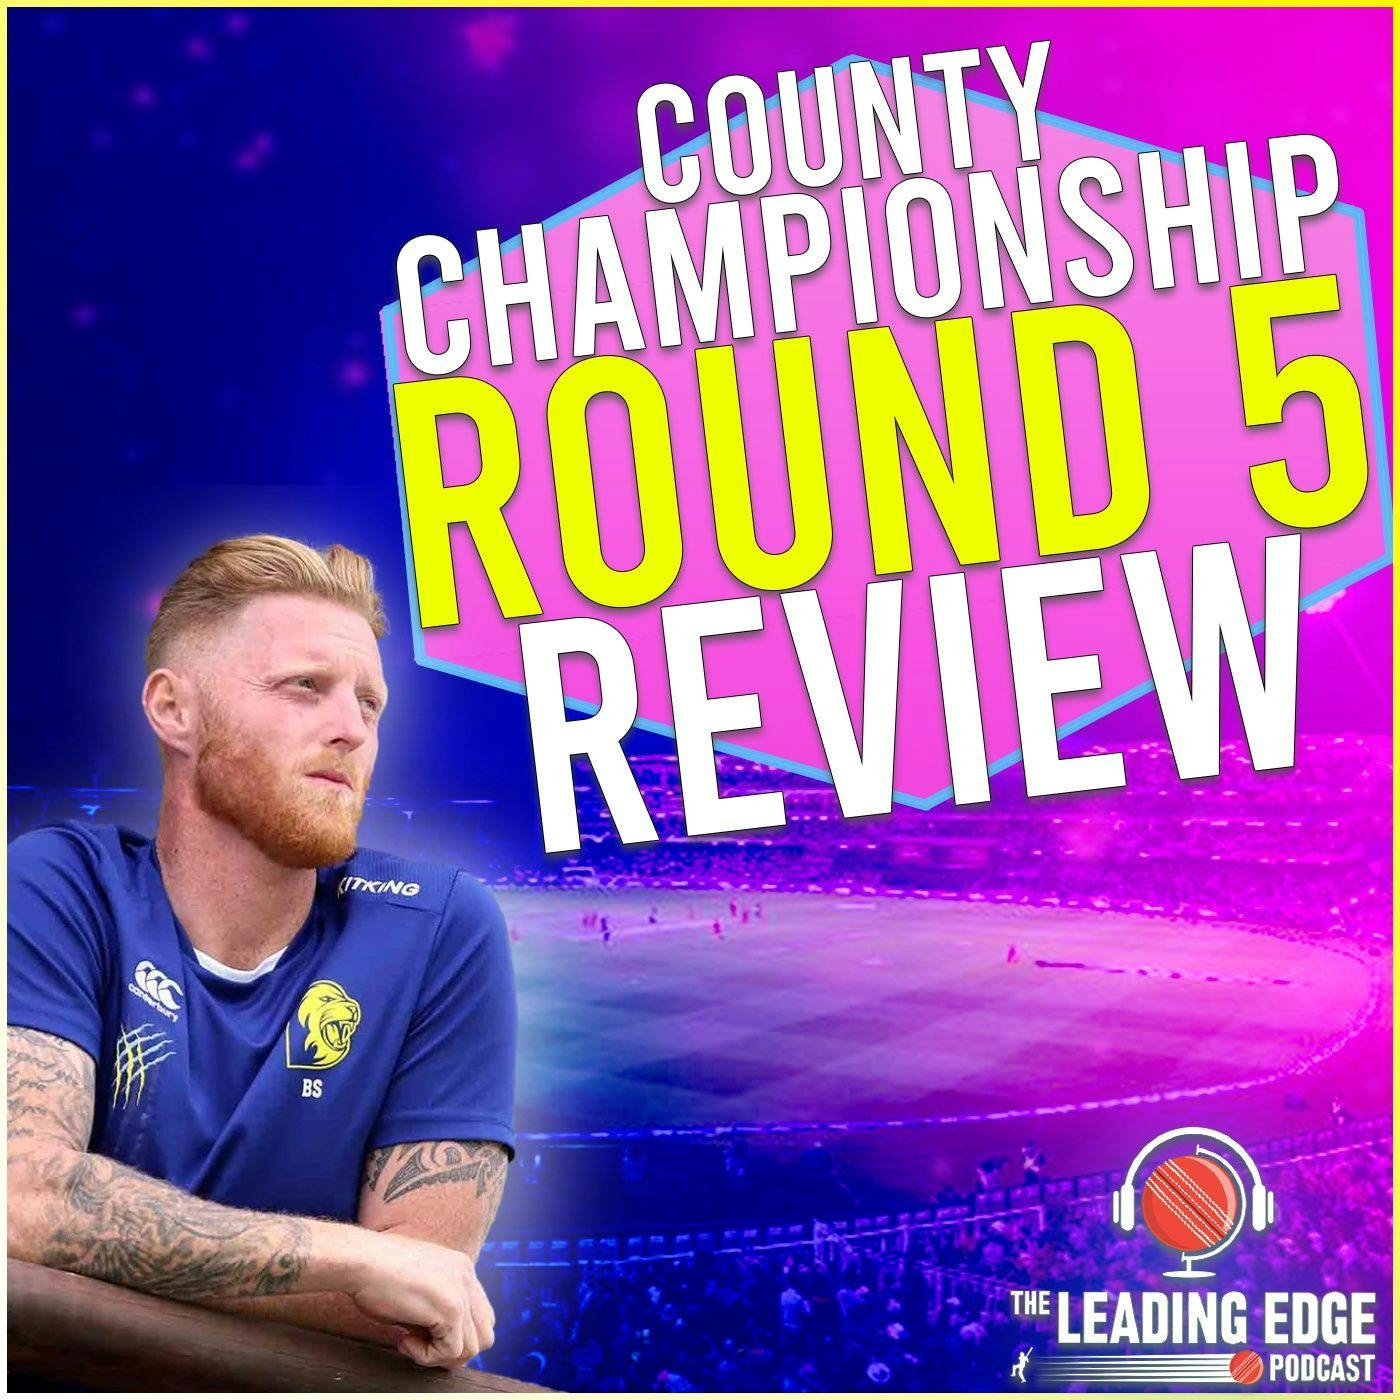 County Championship Round 5 Review Podcast | BEN STOKES HITS 17 6’s